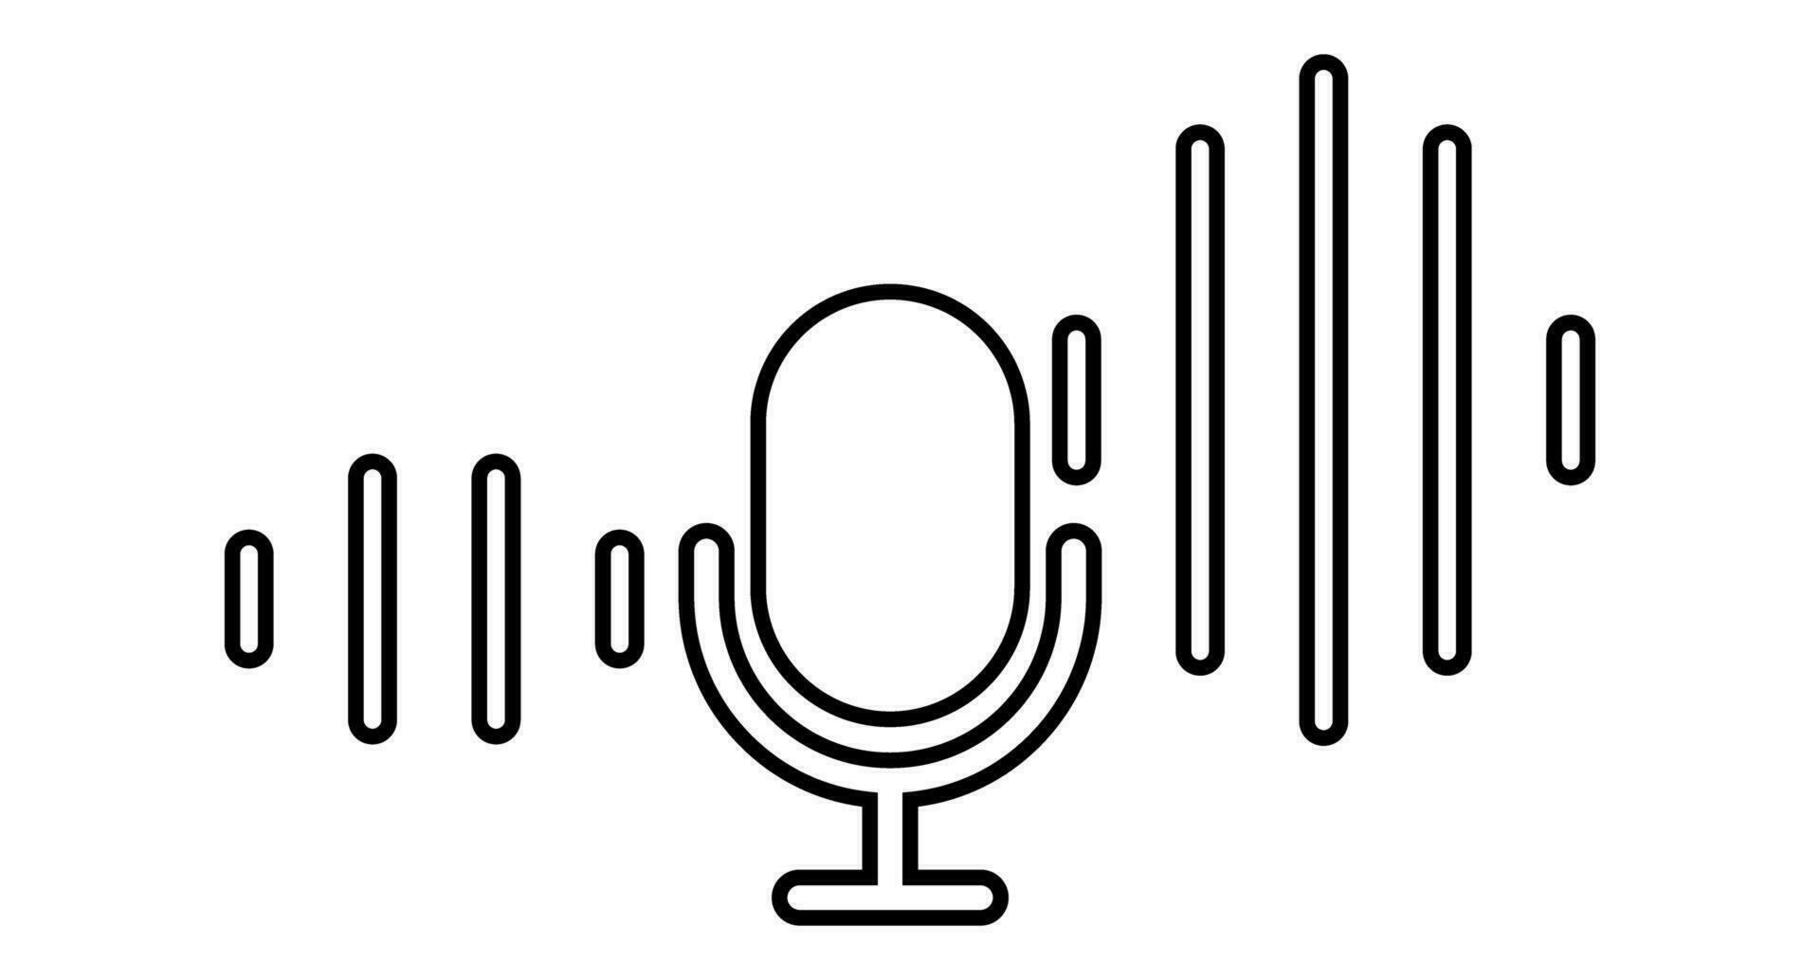 Microphone and sound wave outline symbol. Rhythm and beat of sound. Vectors. vector